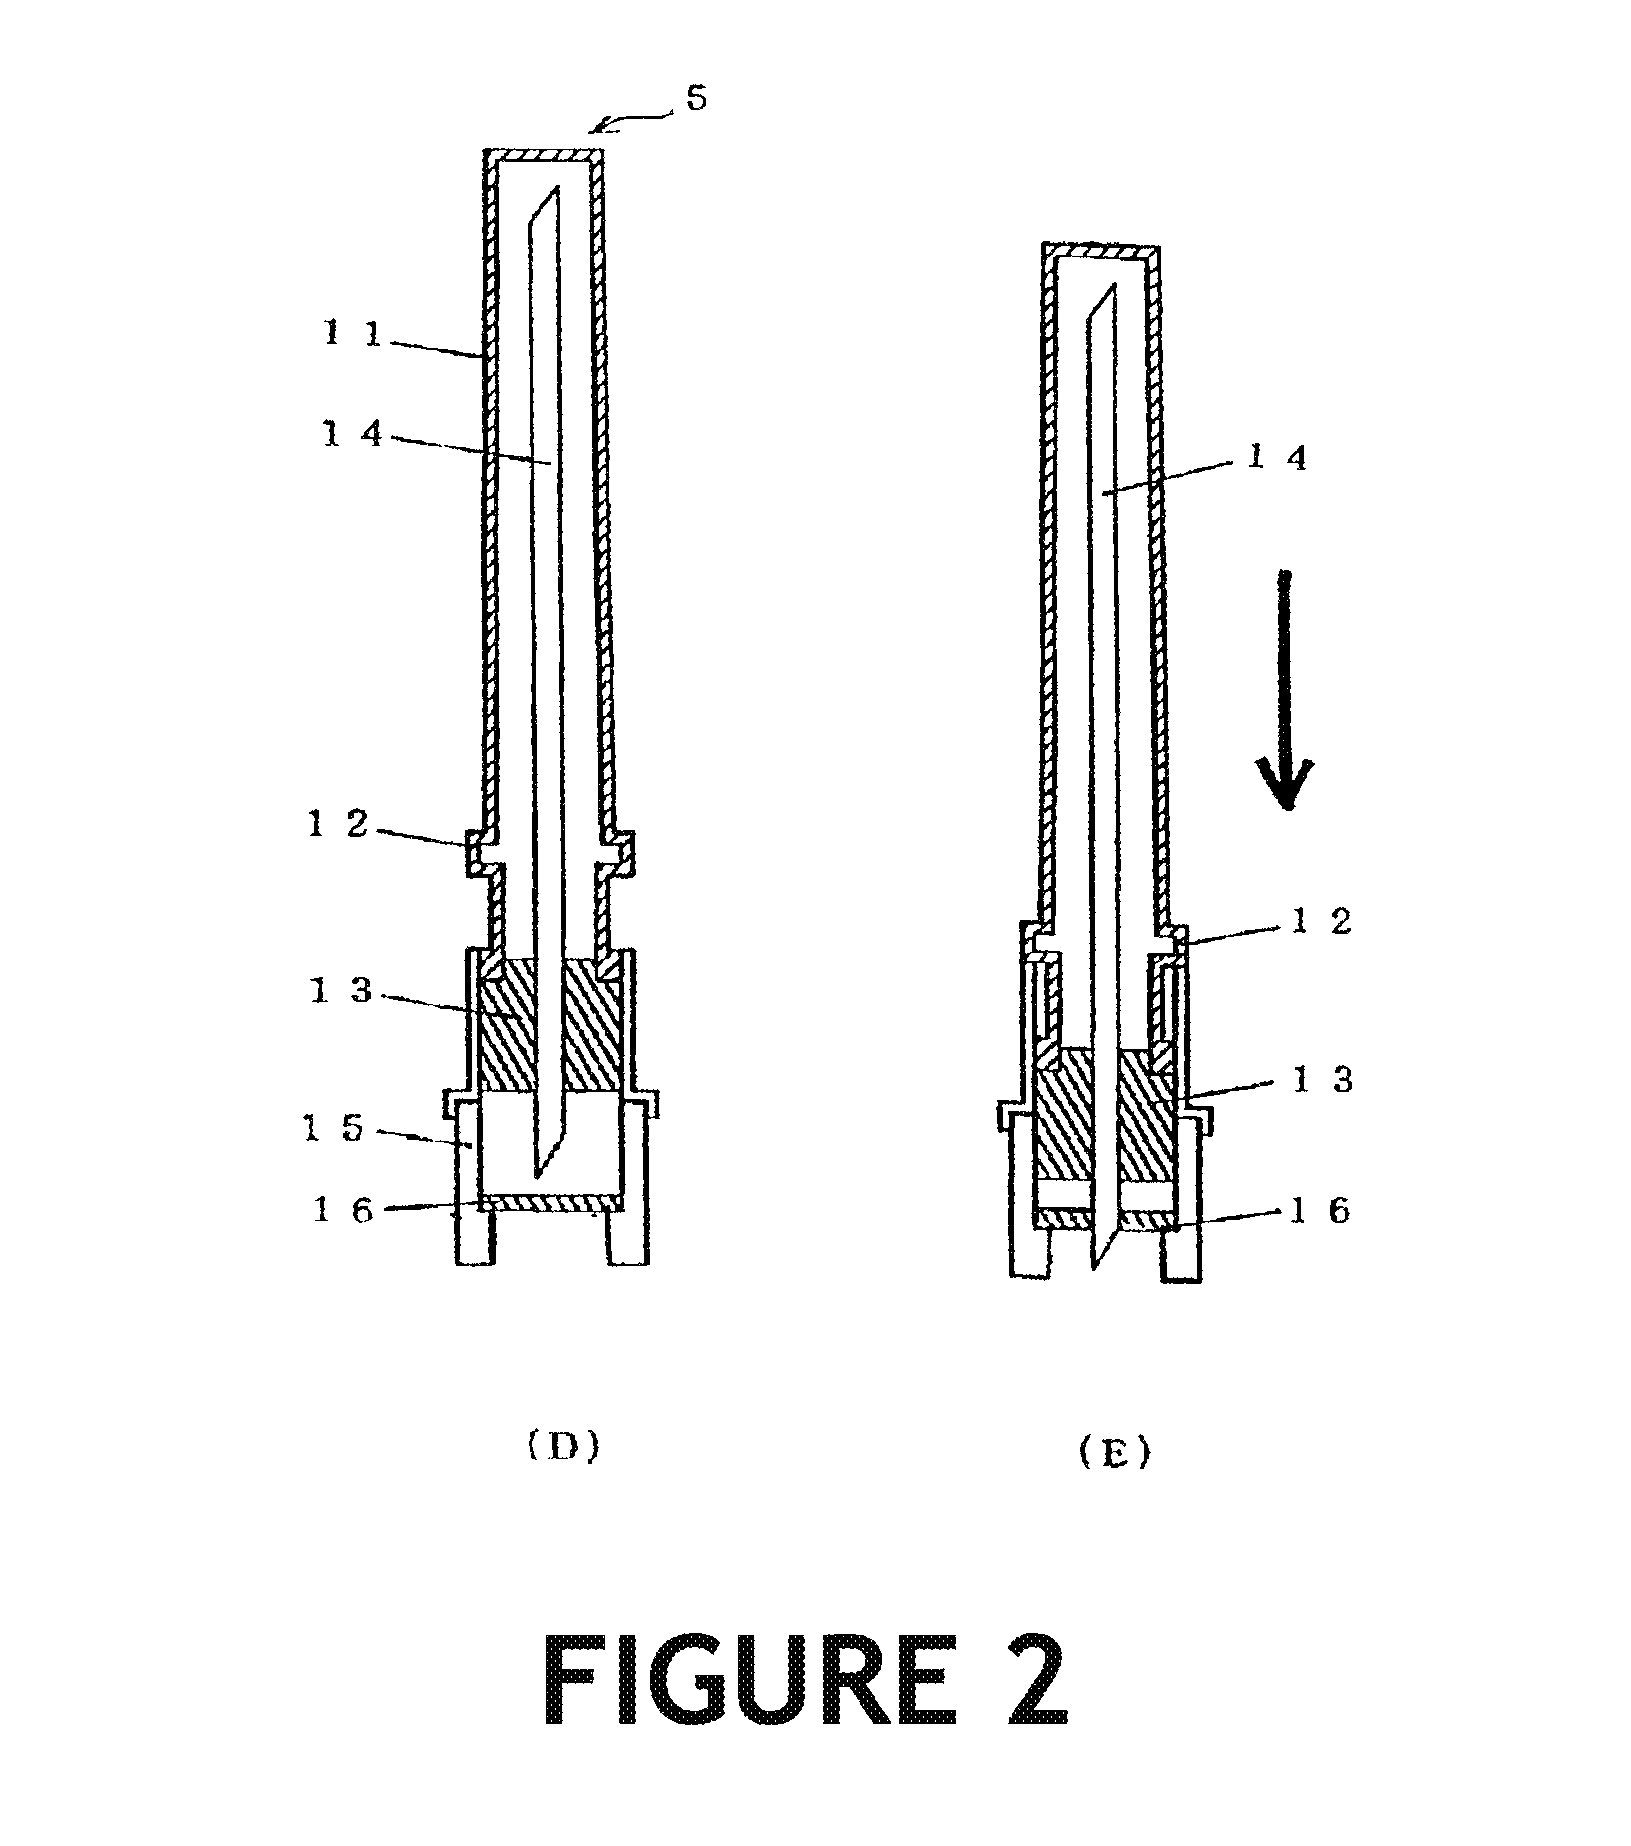 Sterile package, process for producing the same, and production apparatus